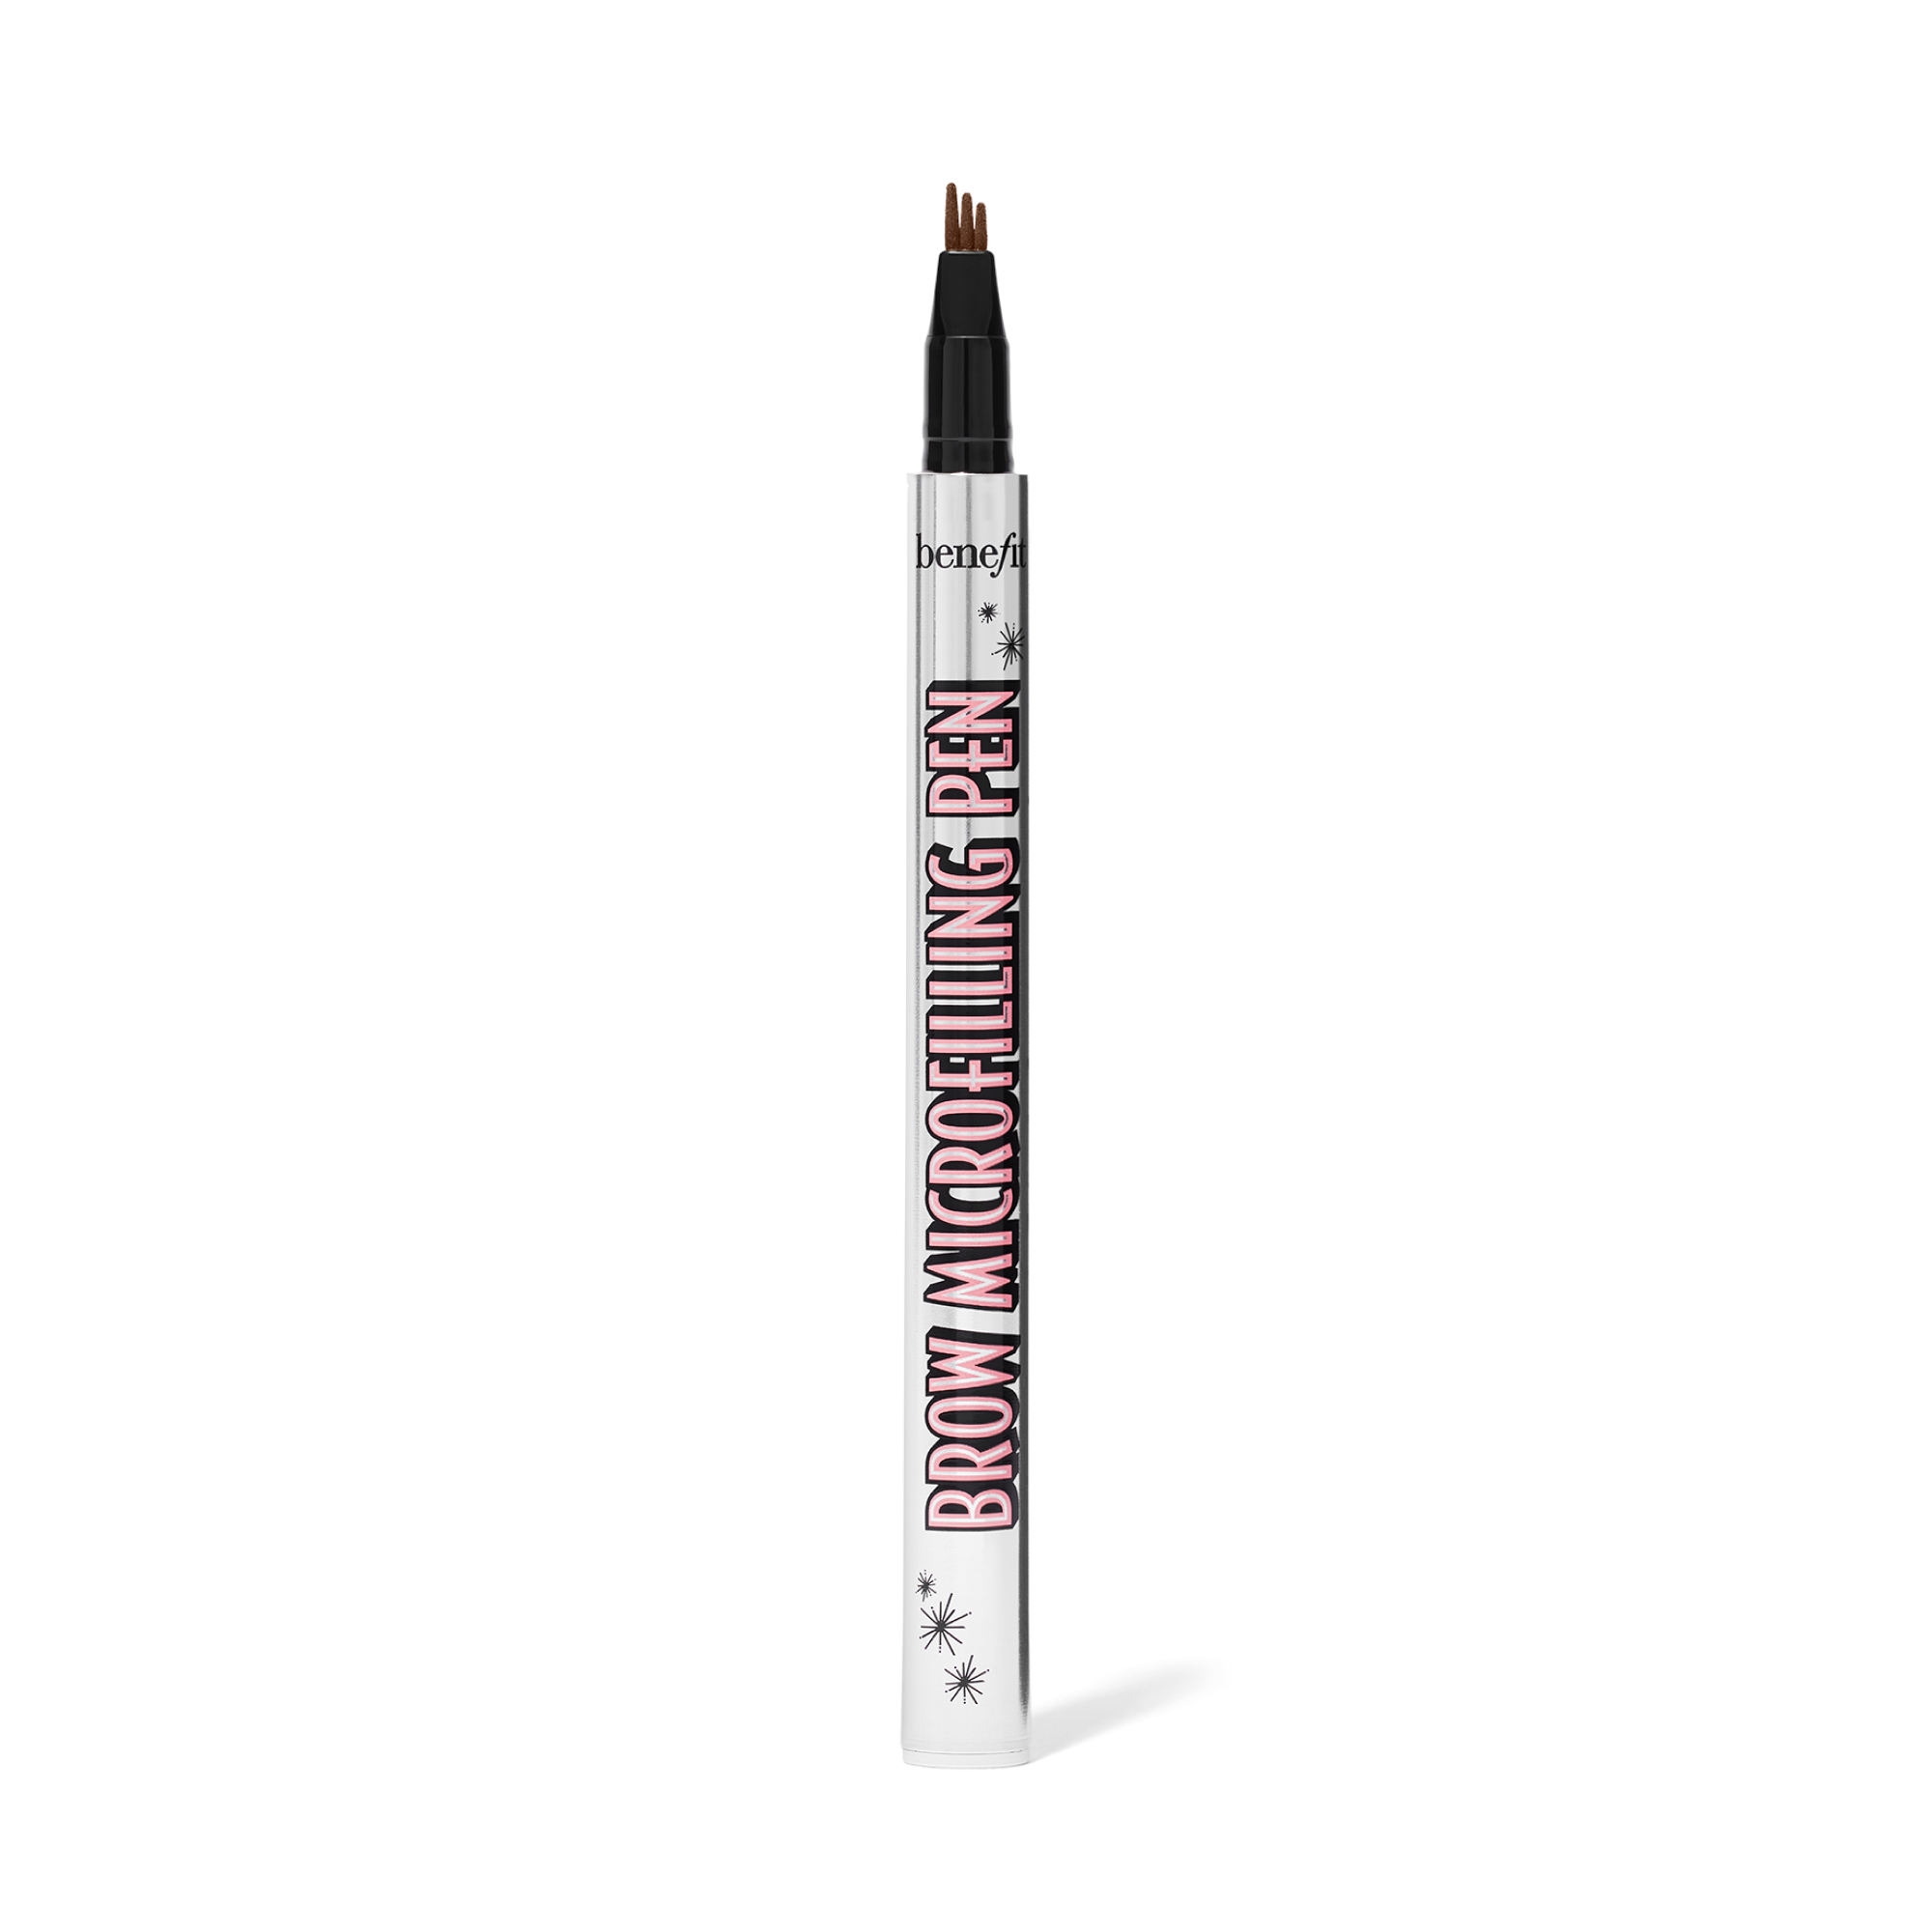 Benefit Cosmetics Brow 24 Hour Long Wear Microfilling Pen - Microbladed Effect Longwearing Pencil Smudge-Proof Eyebrow In 1 Blonde, Size: Full Size